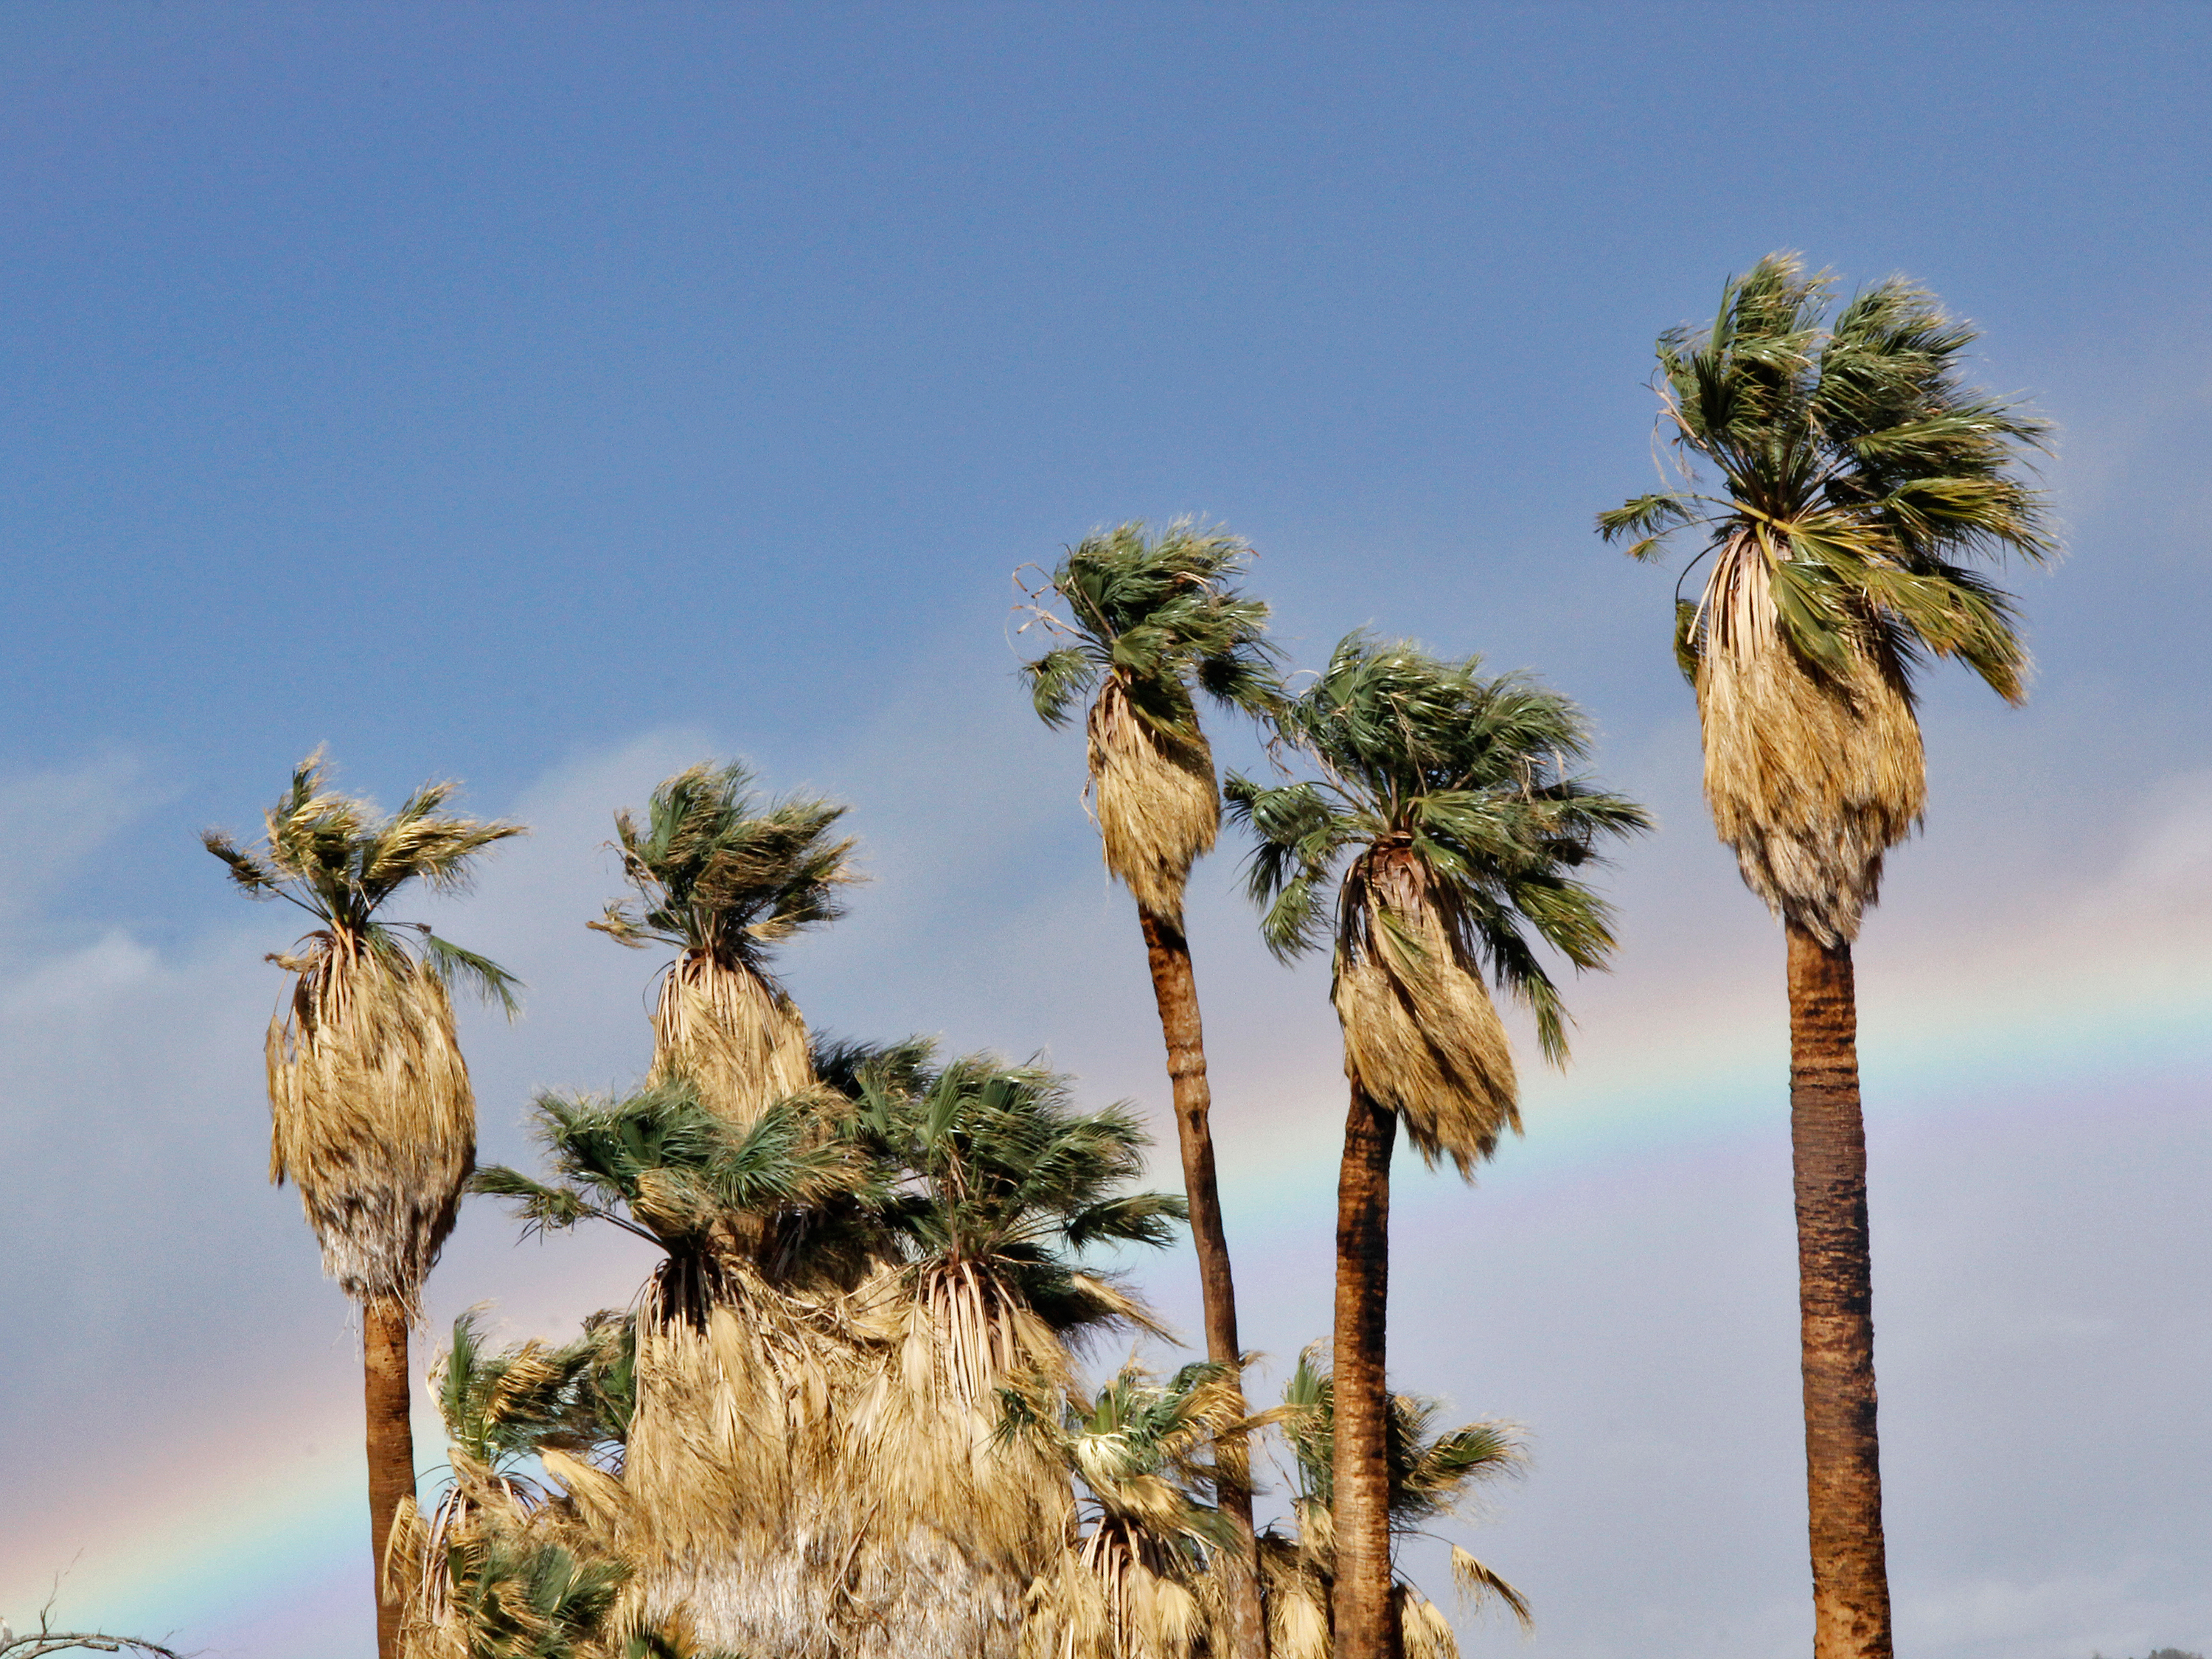 Experience a palm oasis and all the life that exists there